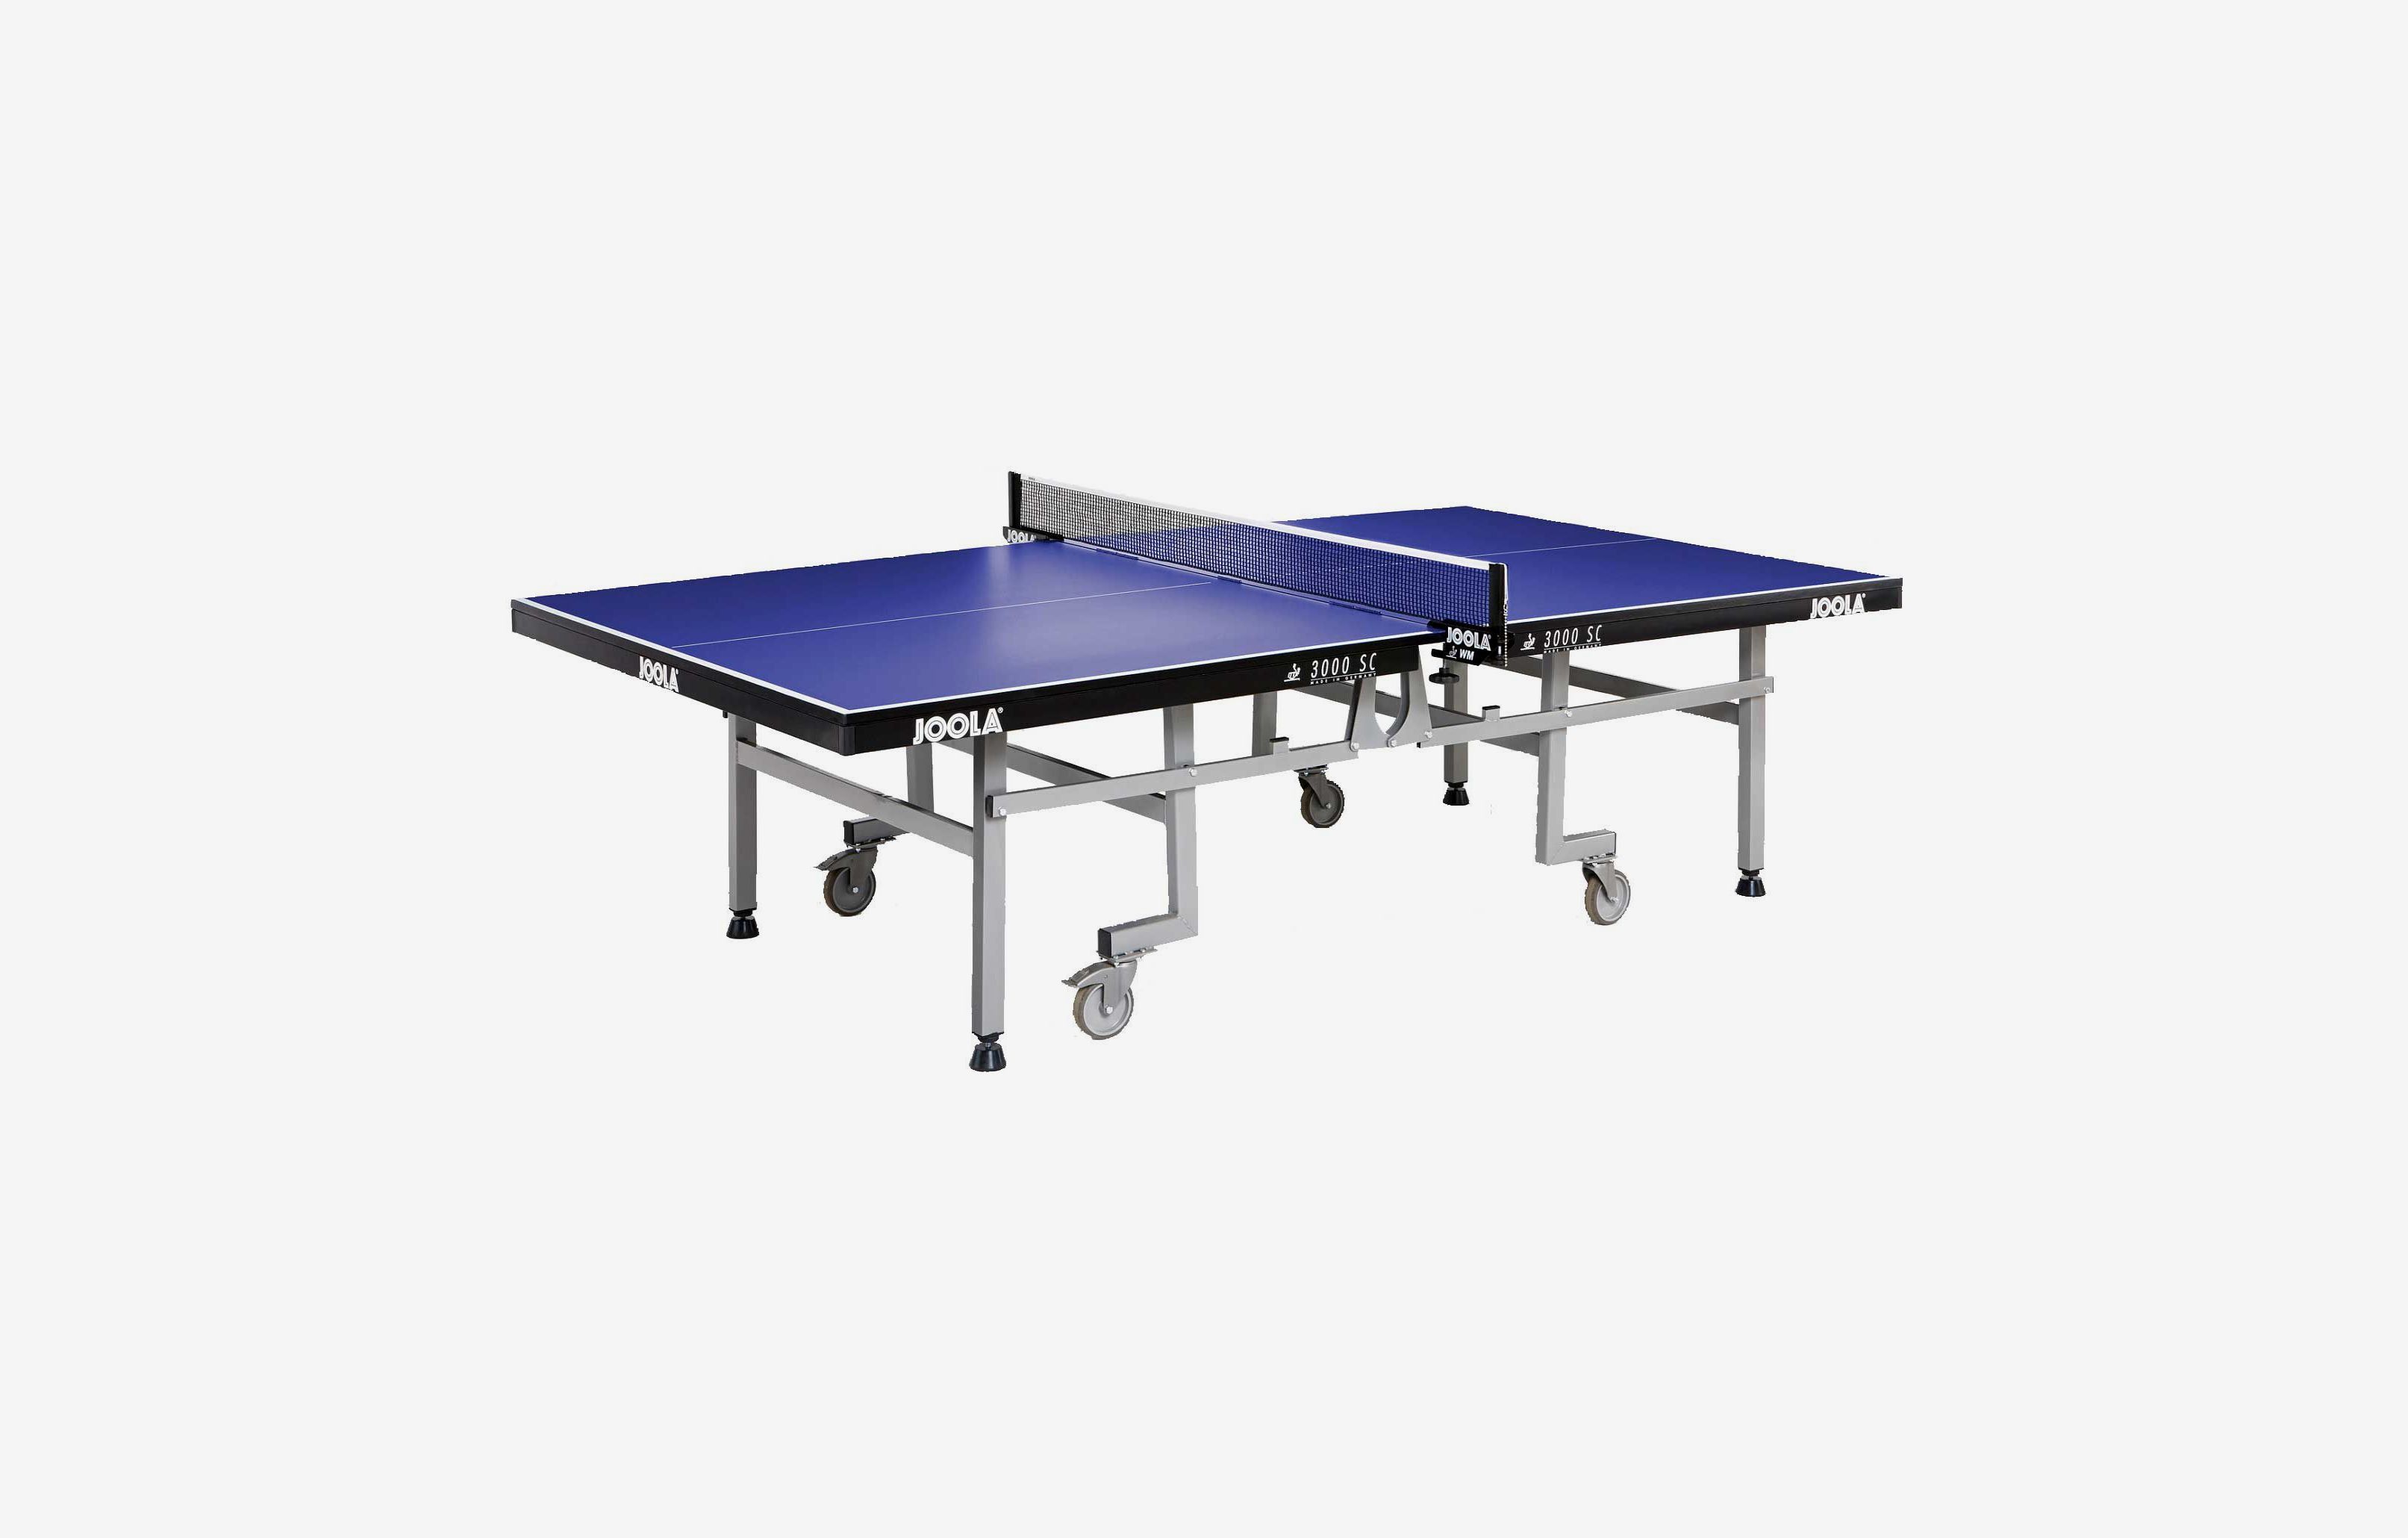 10 Best Ping-Pong Tables 2023